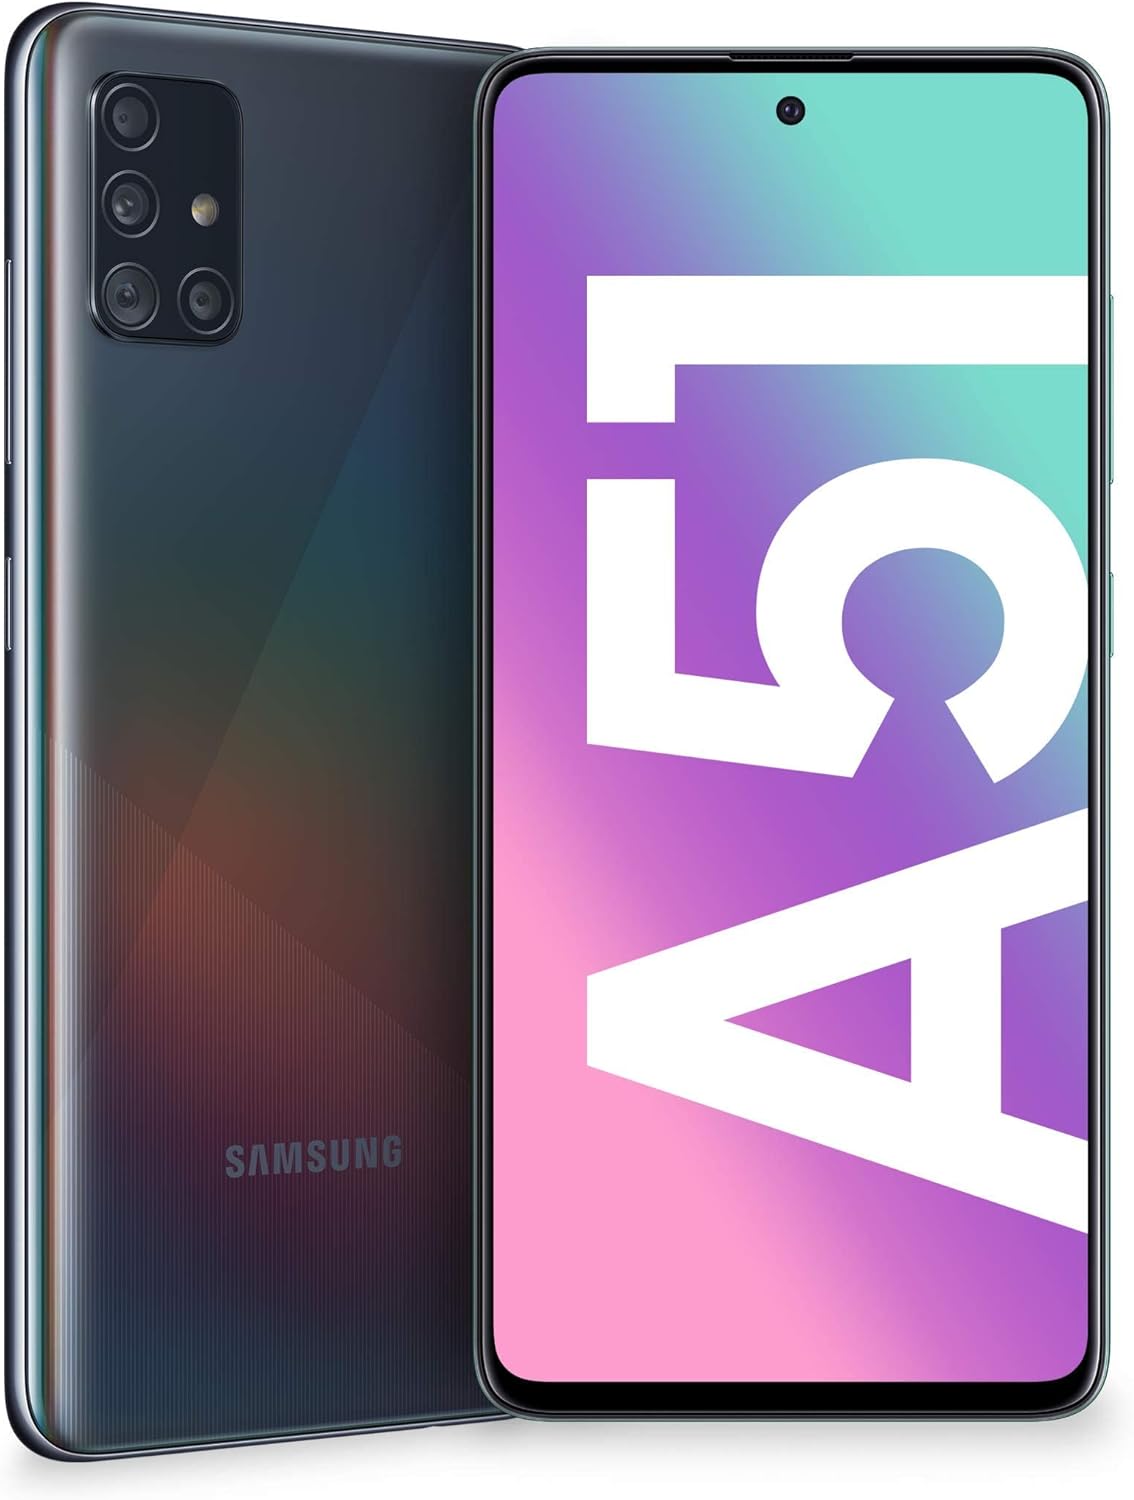 Samsung Galaxy A51 Dual - SIM 128 GB - Prism Crush Black (UK Version) (Renewed)   Import  Single ASIN  Import  Multiple ASIN ×Product customization General Description Gallery Reviews Variations Additional details Product Tags AMA - Amazing Gadgets Outlet